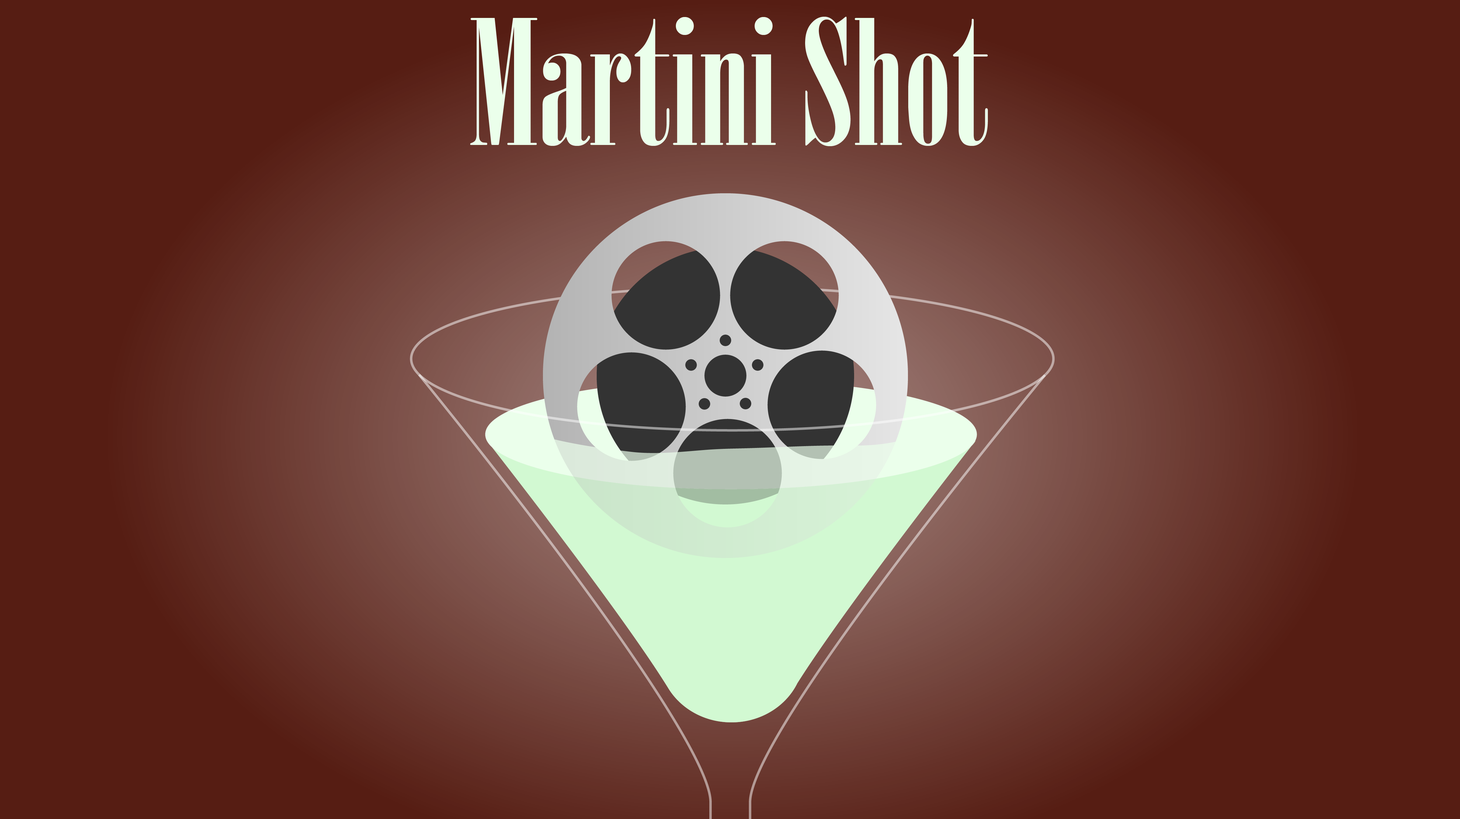 This is Rob Long and on today’s Martini Shot I talk about the newest venture in Hollywood and how people like to say, Never Gonna Work about things that, you know, really could work.